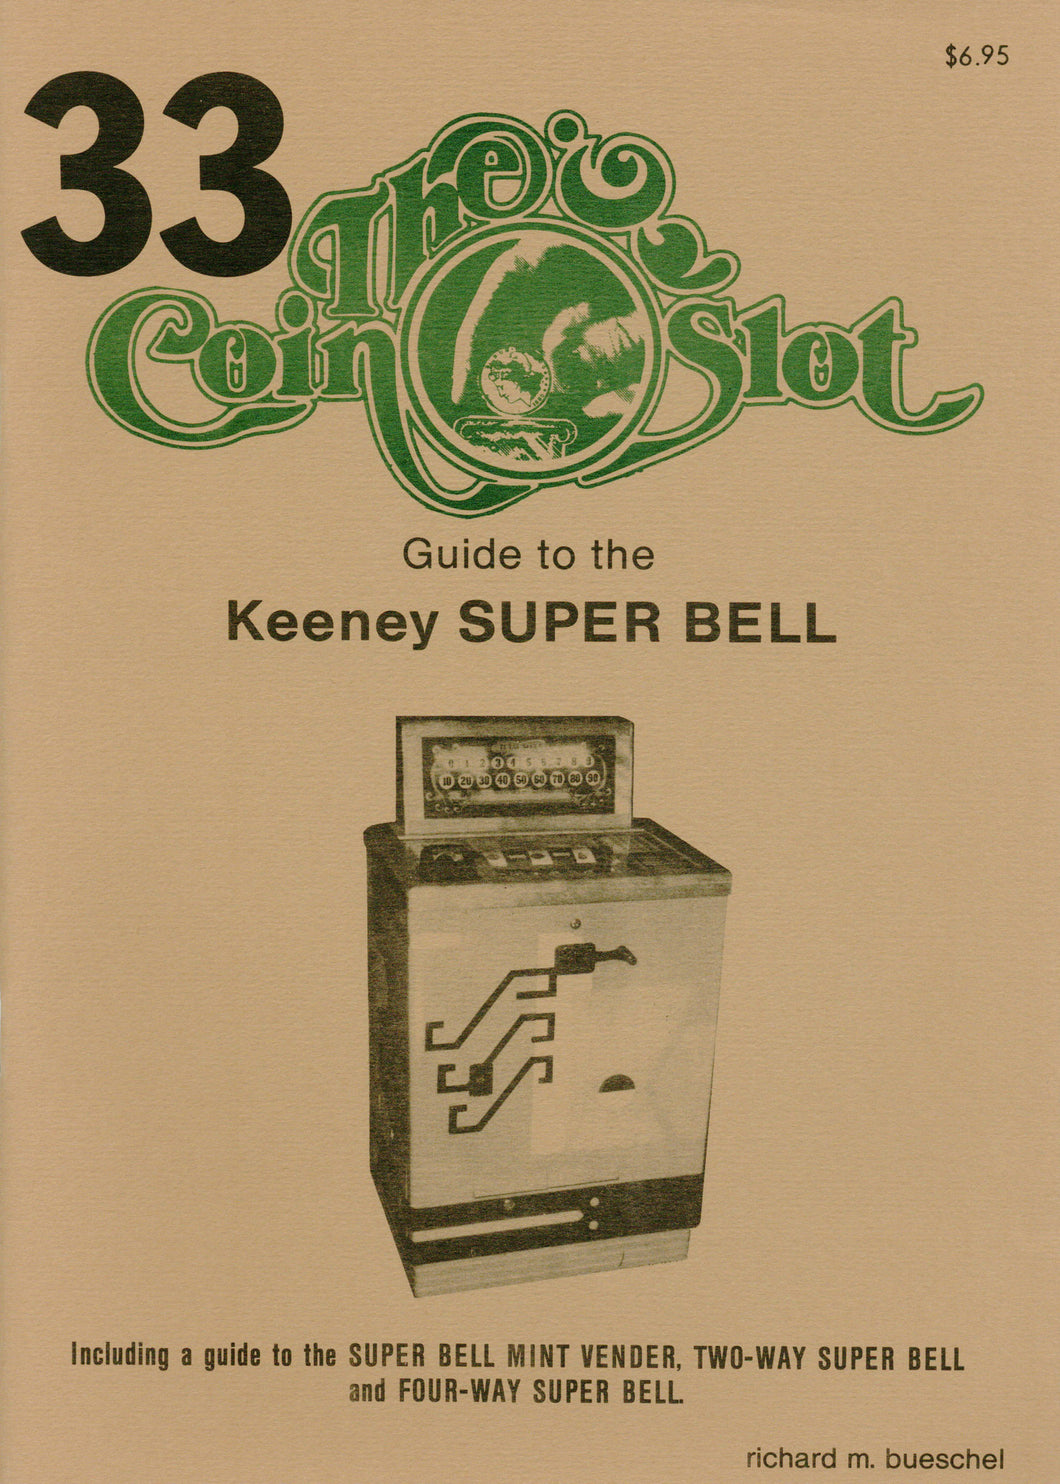 Coin Slot #33. Guide to the Keeney Super Bell